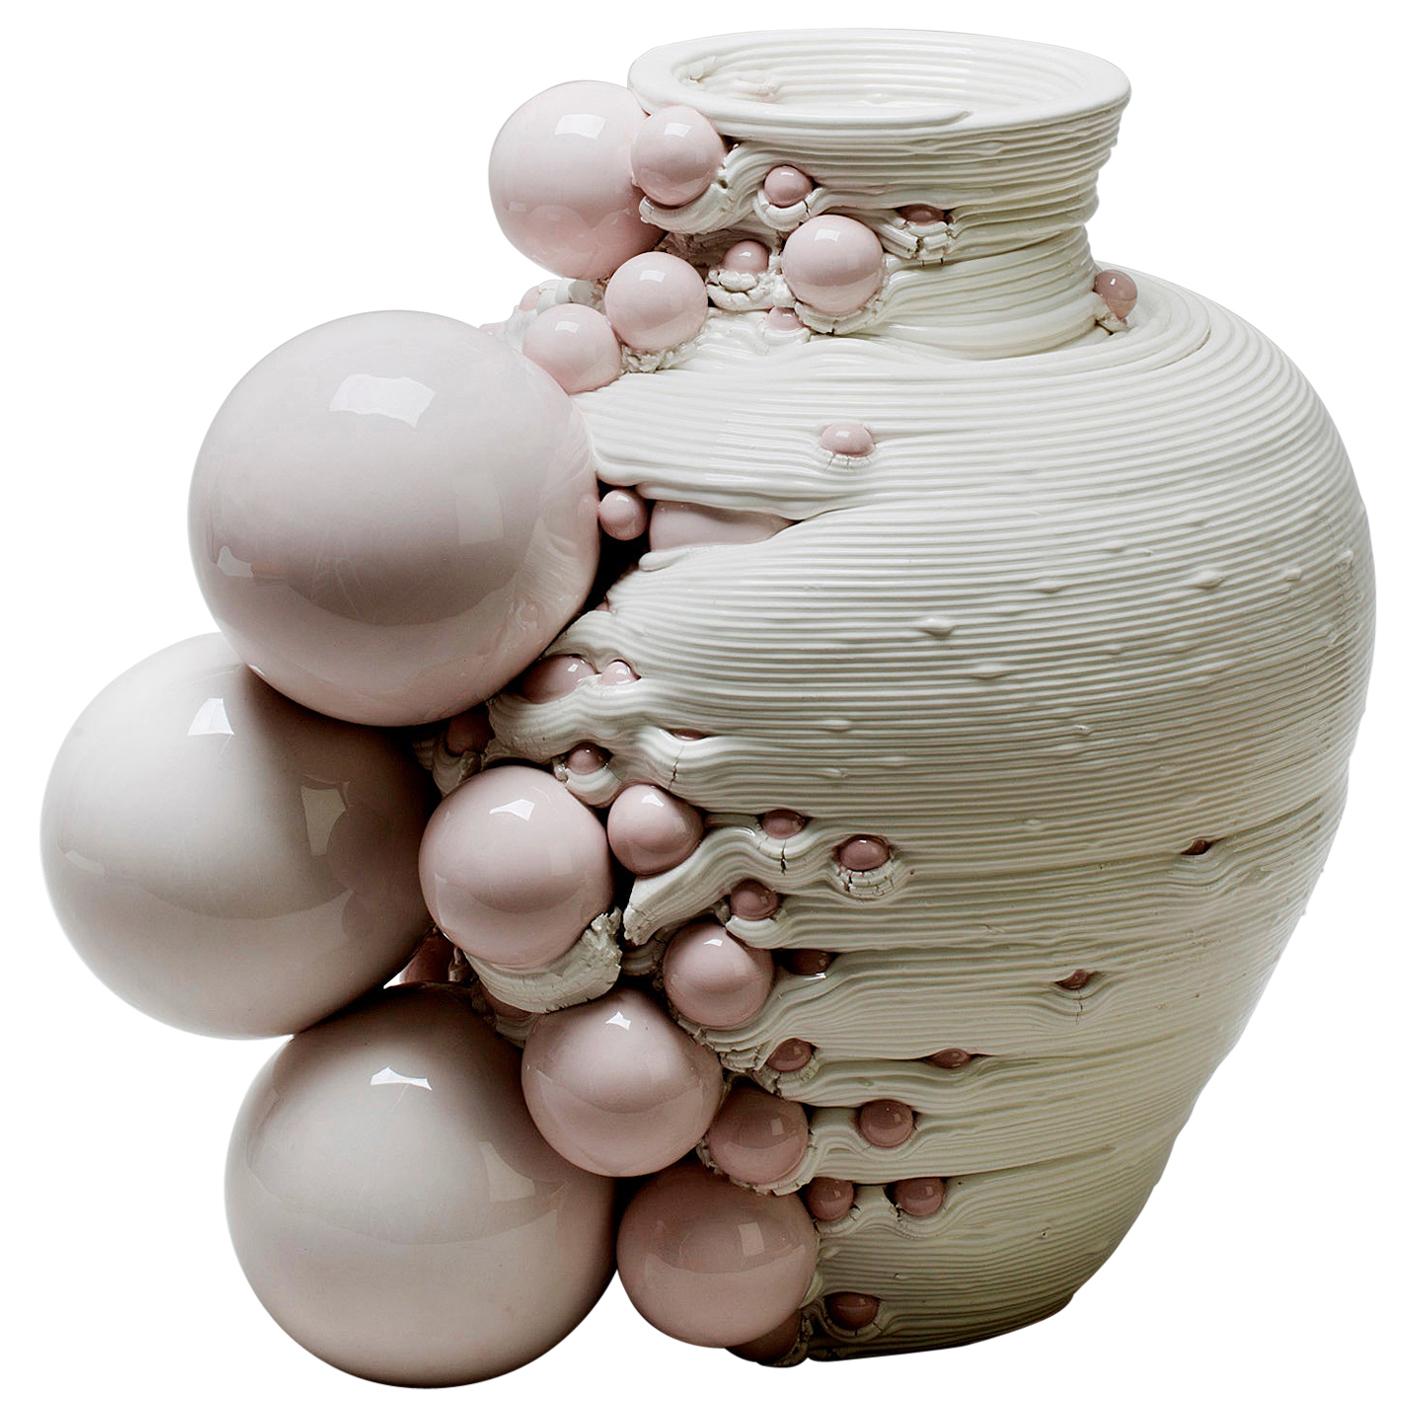 White 3D Printed Ceramic Sculptural Vase Italy Contemporary, 21st Century For Sale